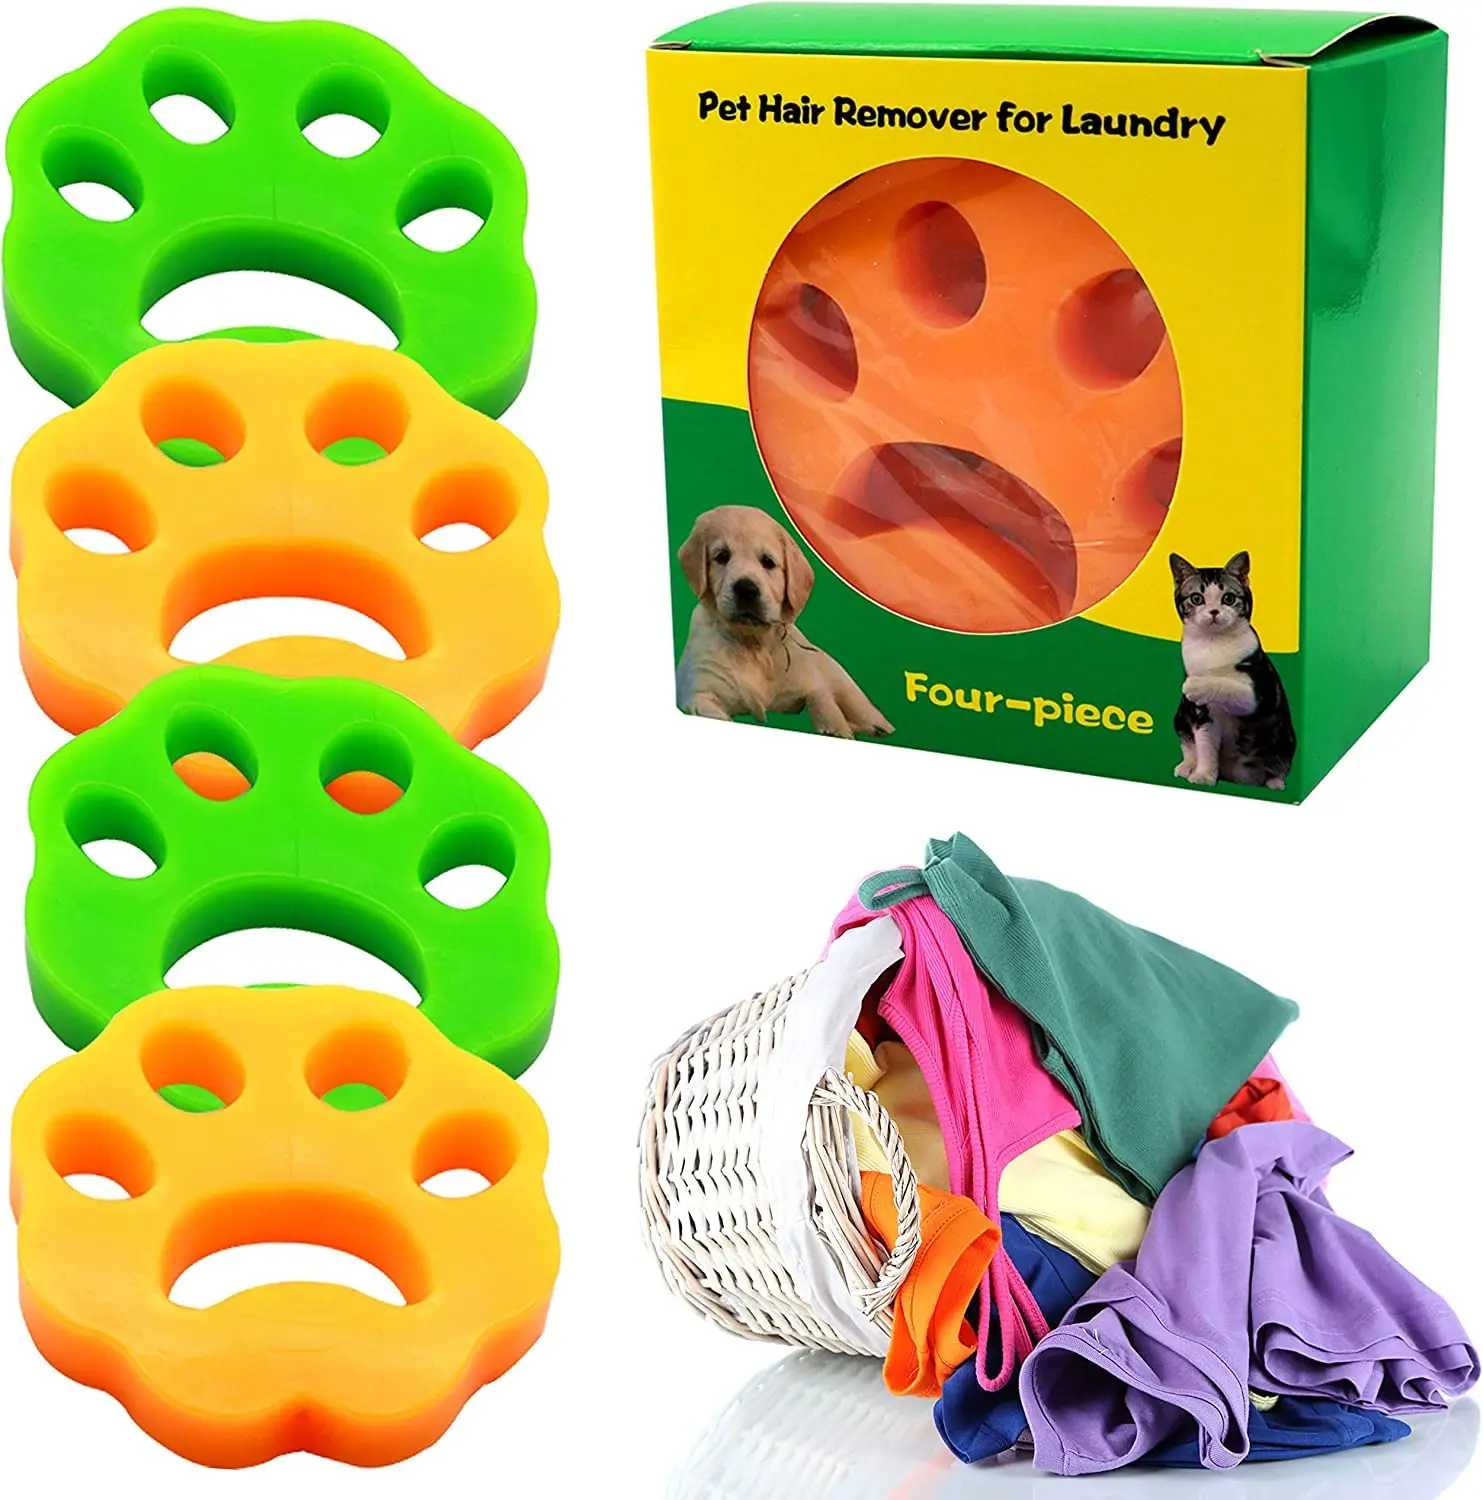 

Pet Hair Remover for Laundry, Lint Catcher, Laundry Catcher for Washing Machine, Reusable Dog Hair Remover for Laundry